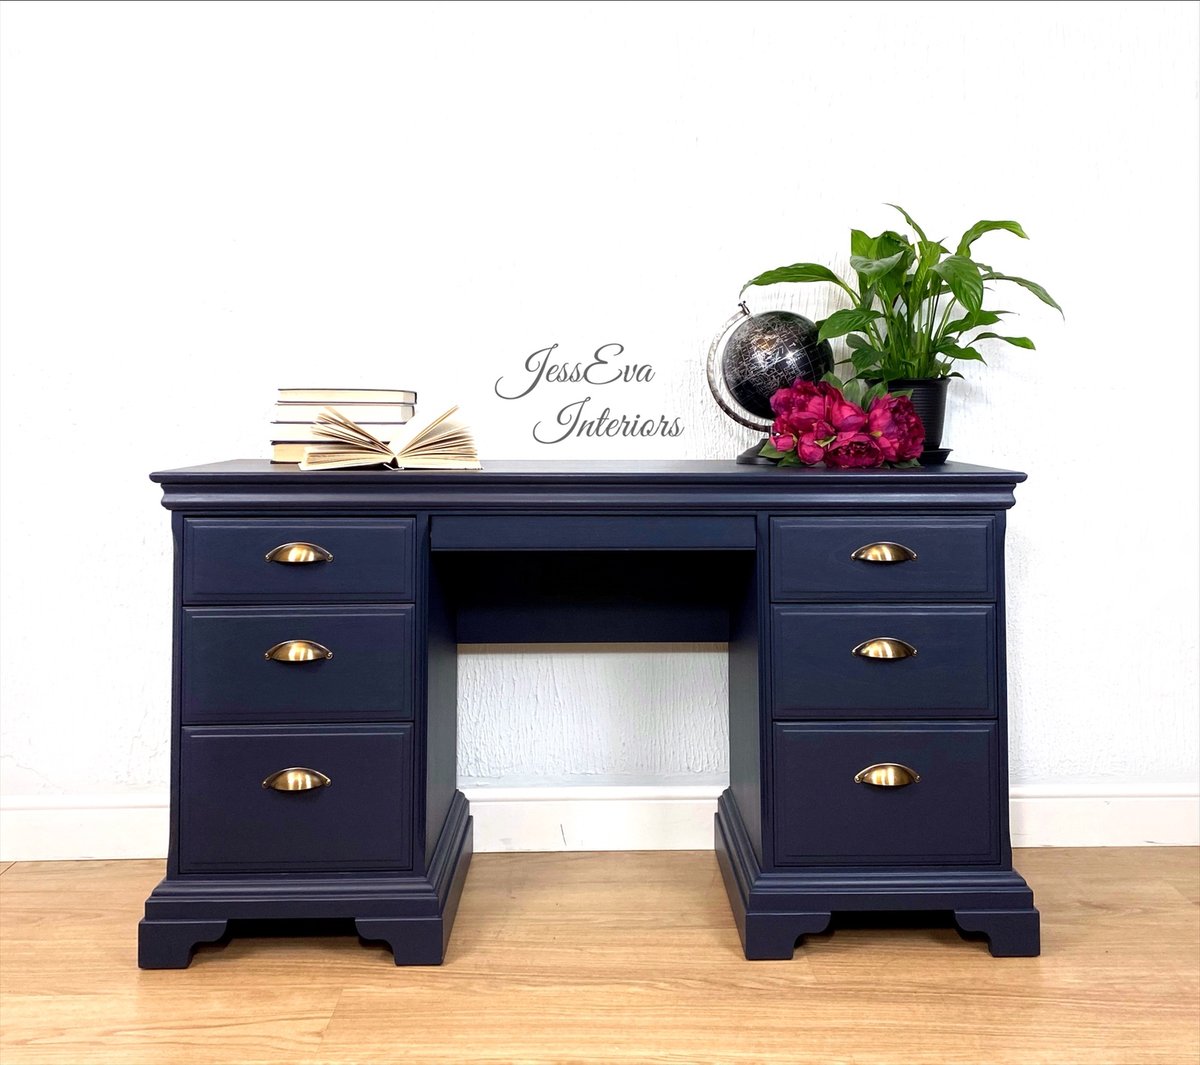 Vintage Stag WRITING DESK / DRESSING TABLE painted in Navy Blue.